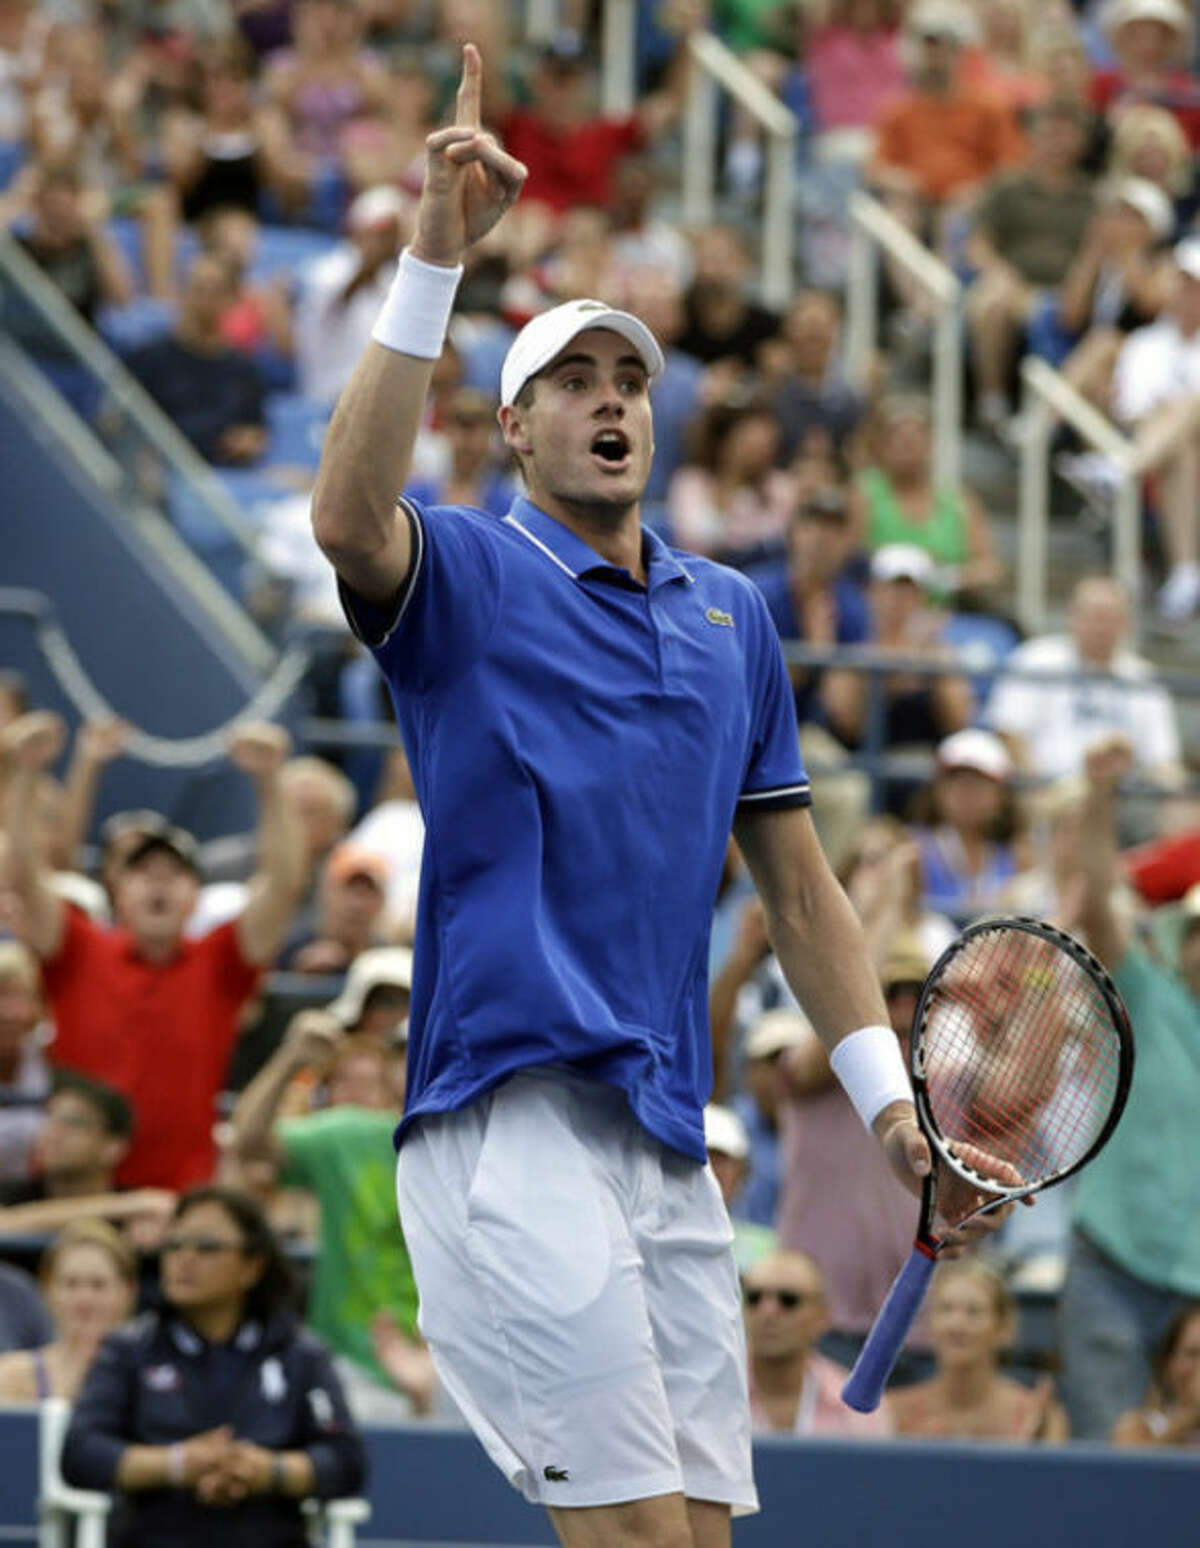 John Isner reacts after a point against Philipp Kohlschreiber, of Germany, during the third round of the 2013 U.S. Open tennis tournament, Saturday, Aug. 31, 2013, in New York. (AP Photo/Darron Cummings)